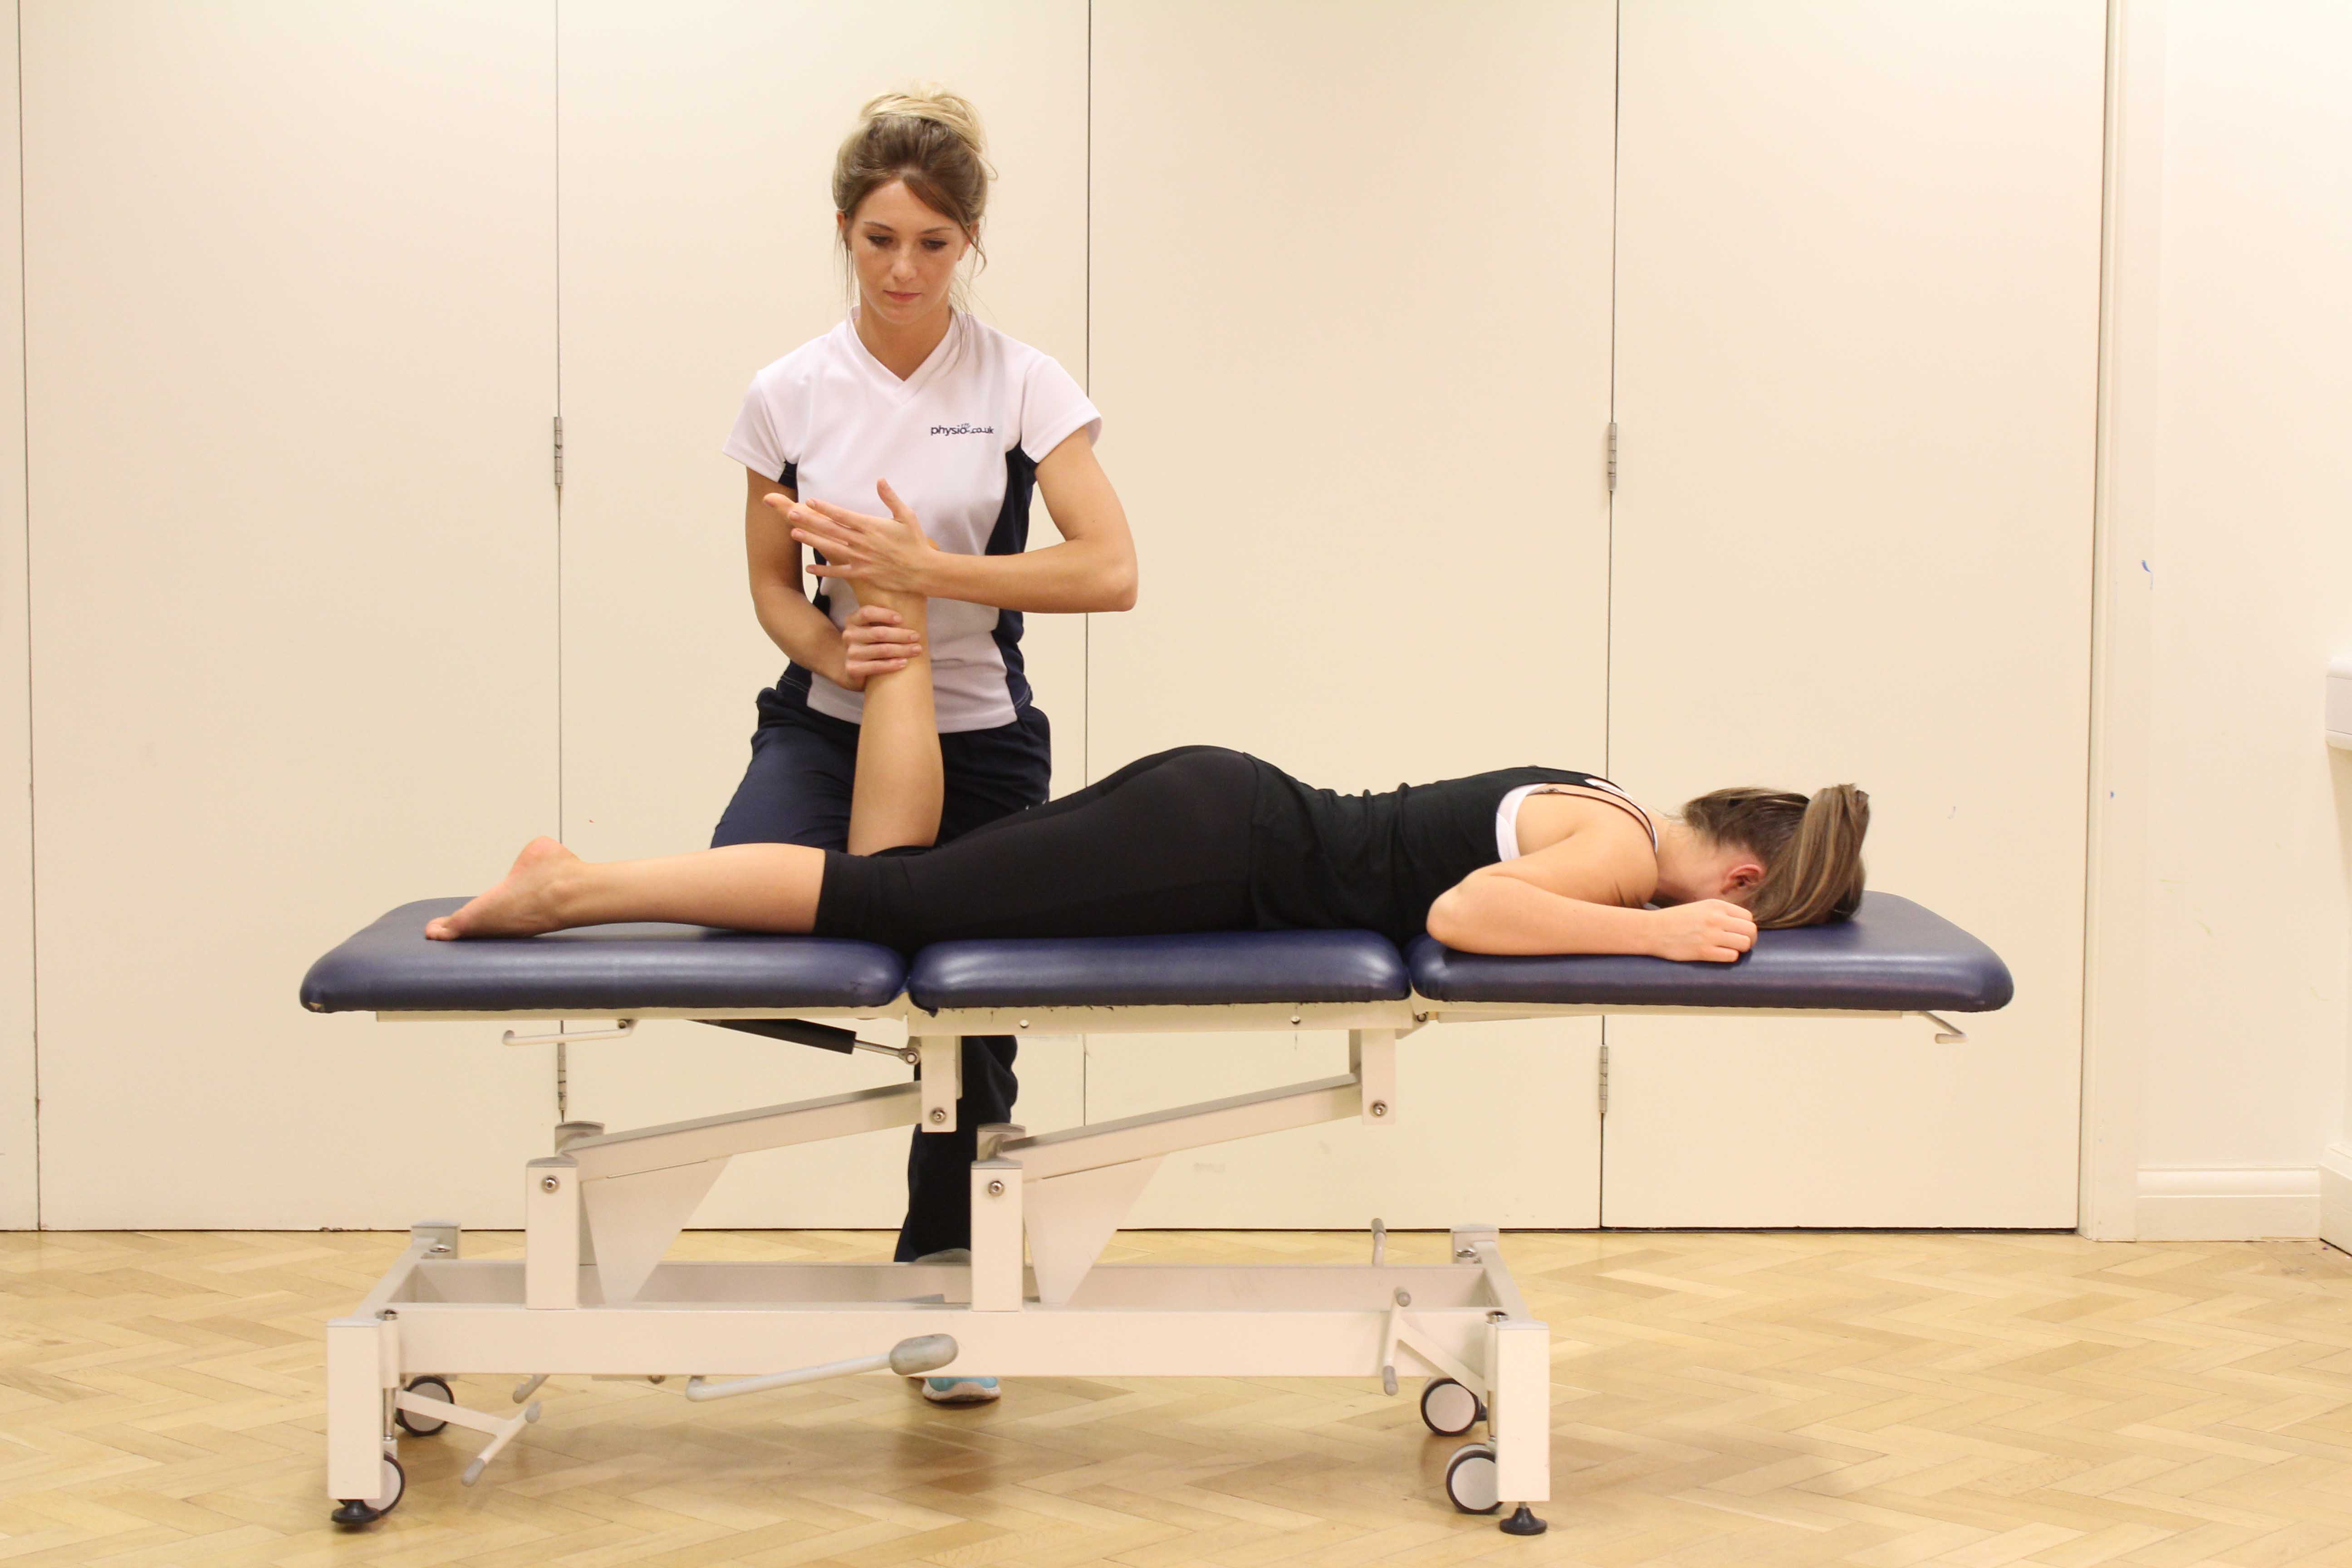 mobilisations and stretches of the foot and ankle